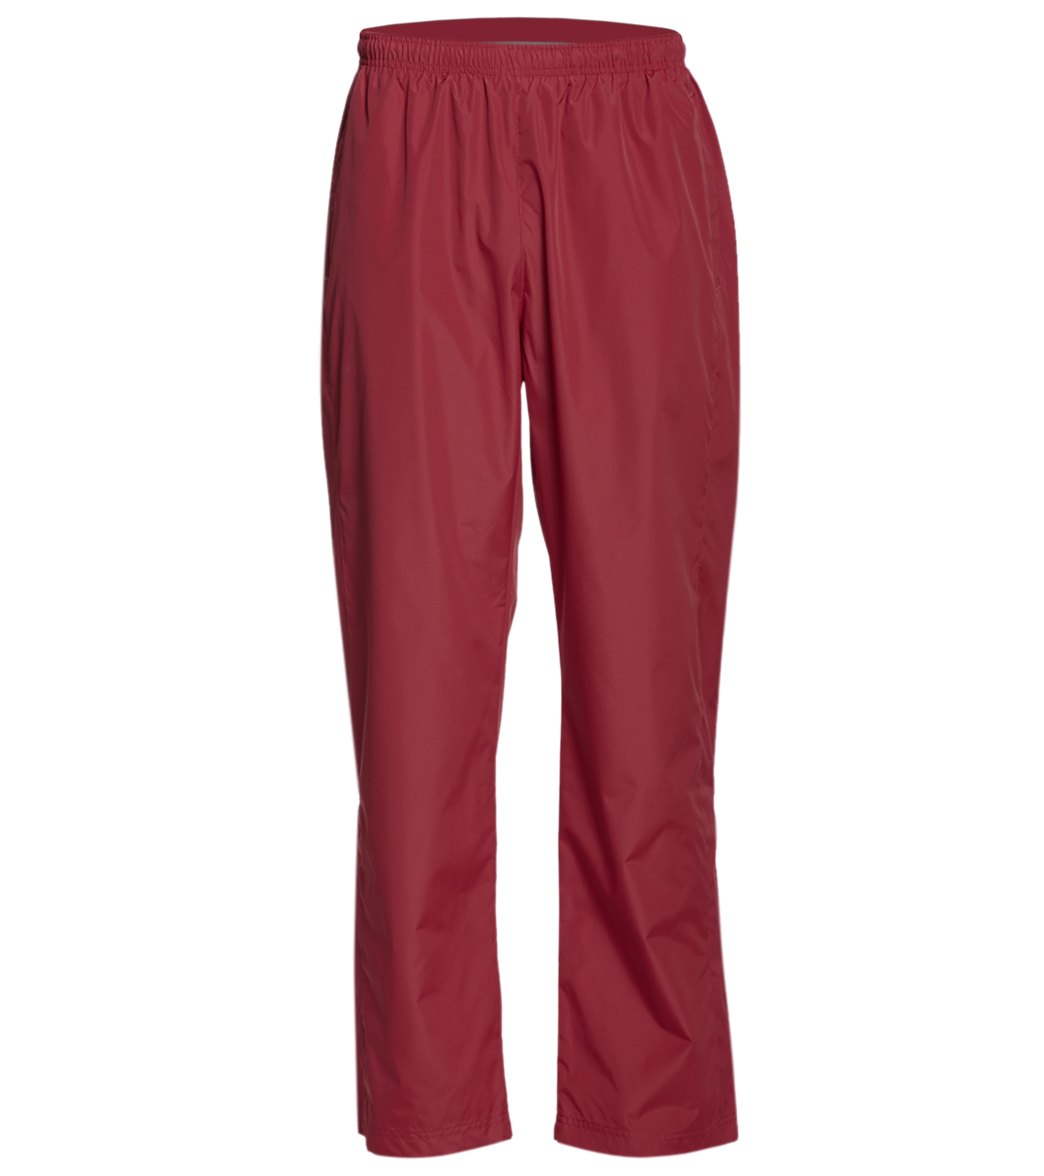 Women's Warm Up Pants - Maroon Large Polyester - Swimoutlet.com